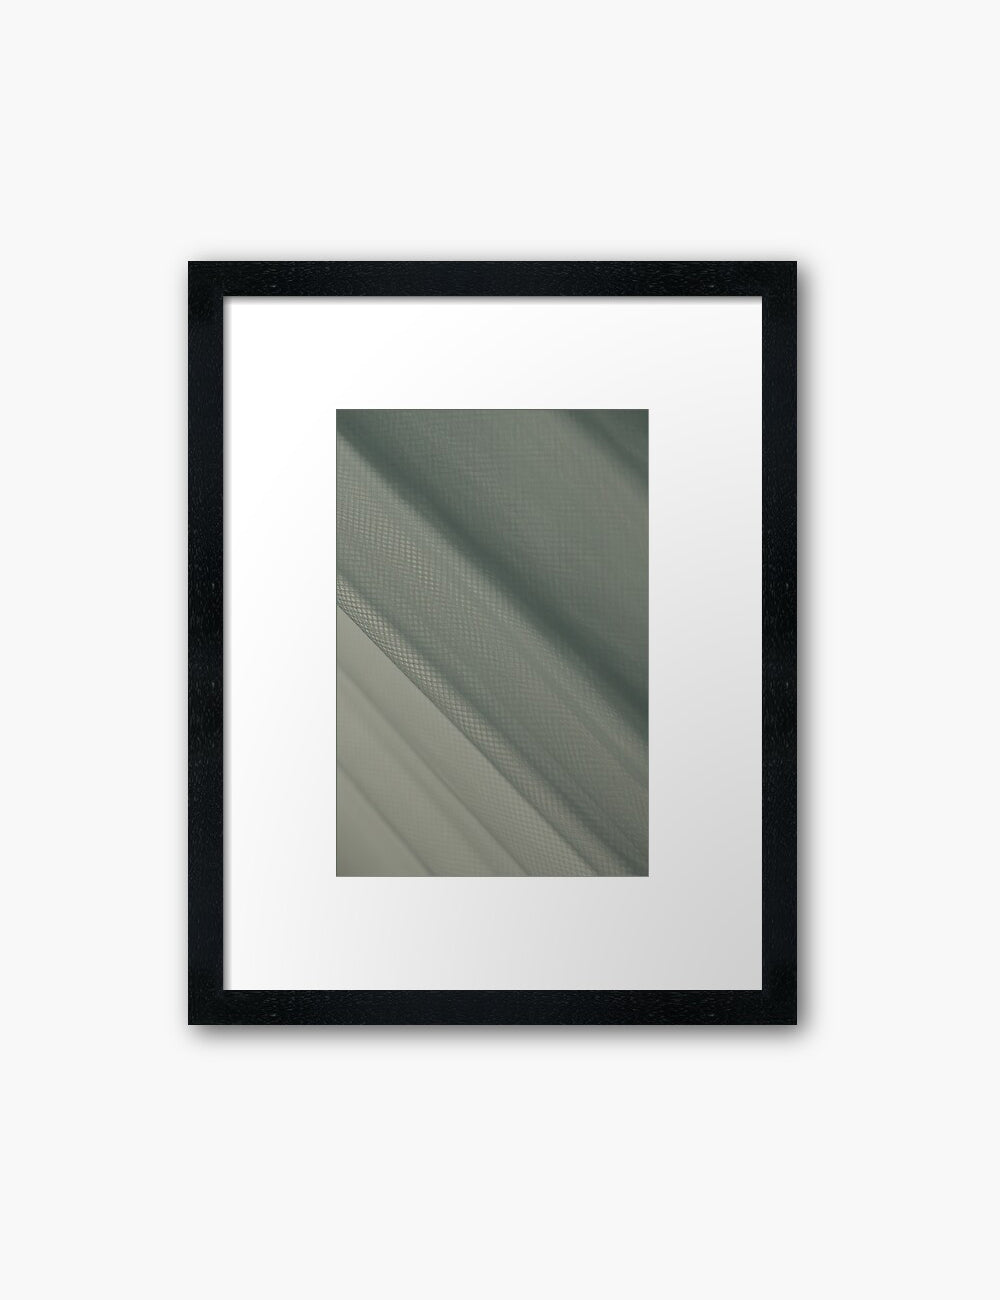 Abstract minimalist photography 2.1 Green aesthetic. Printable wall art photography. PAPER MOON Art & Design